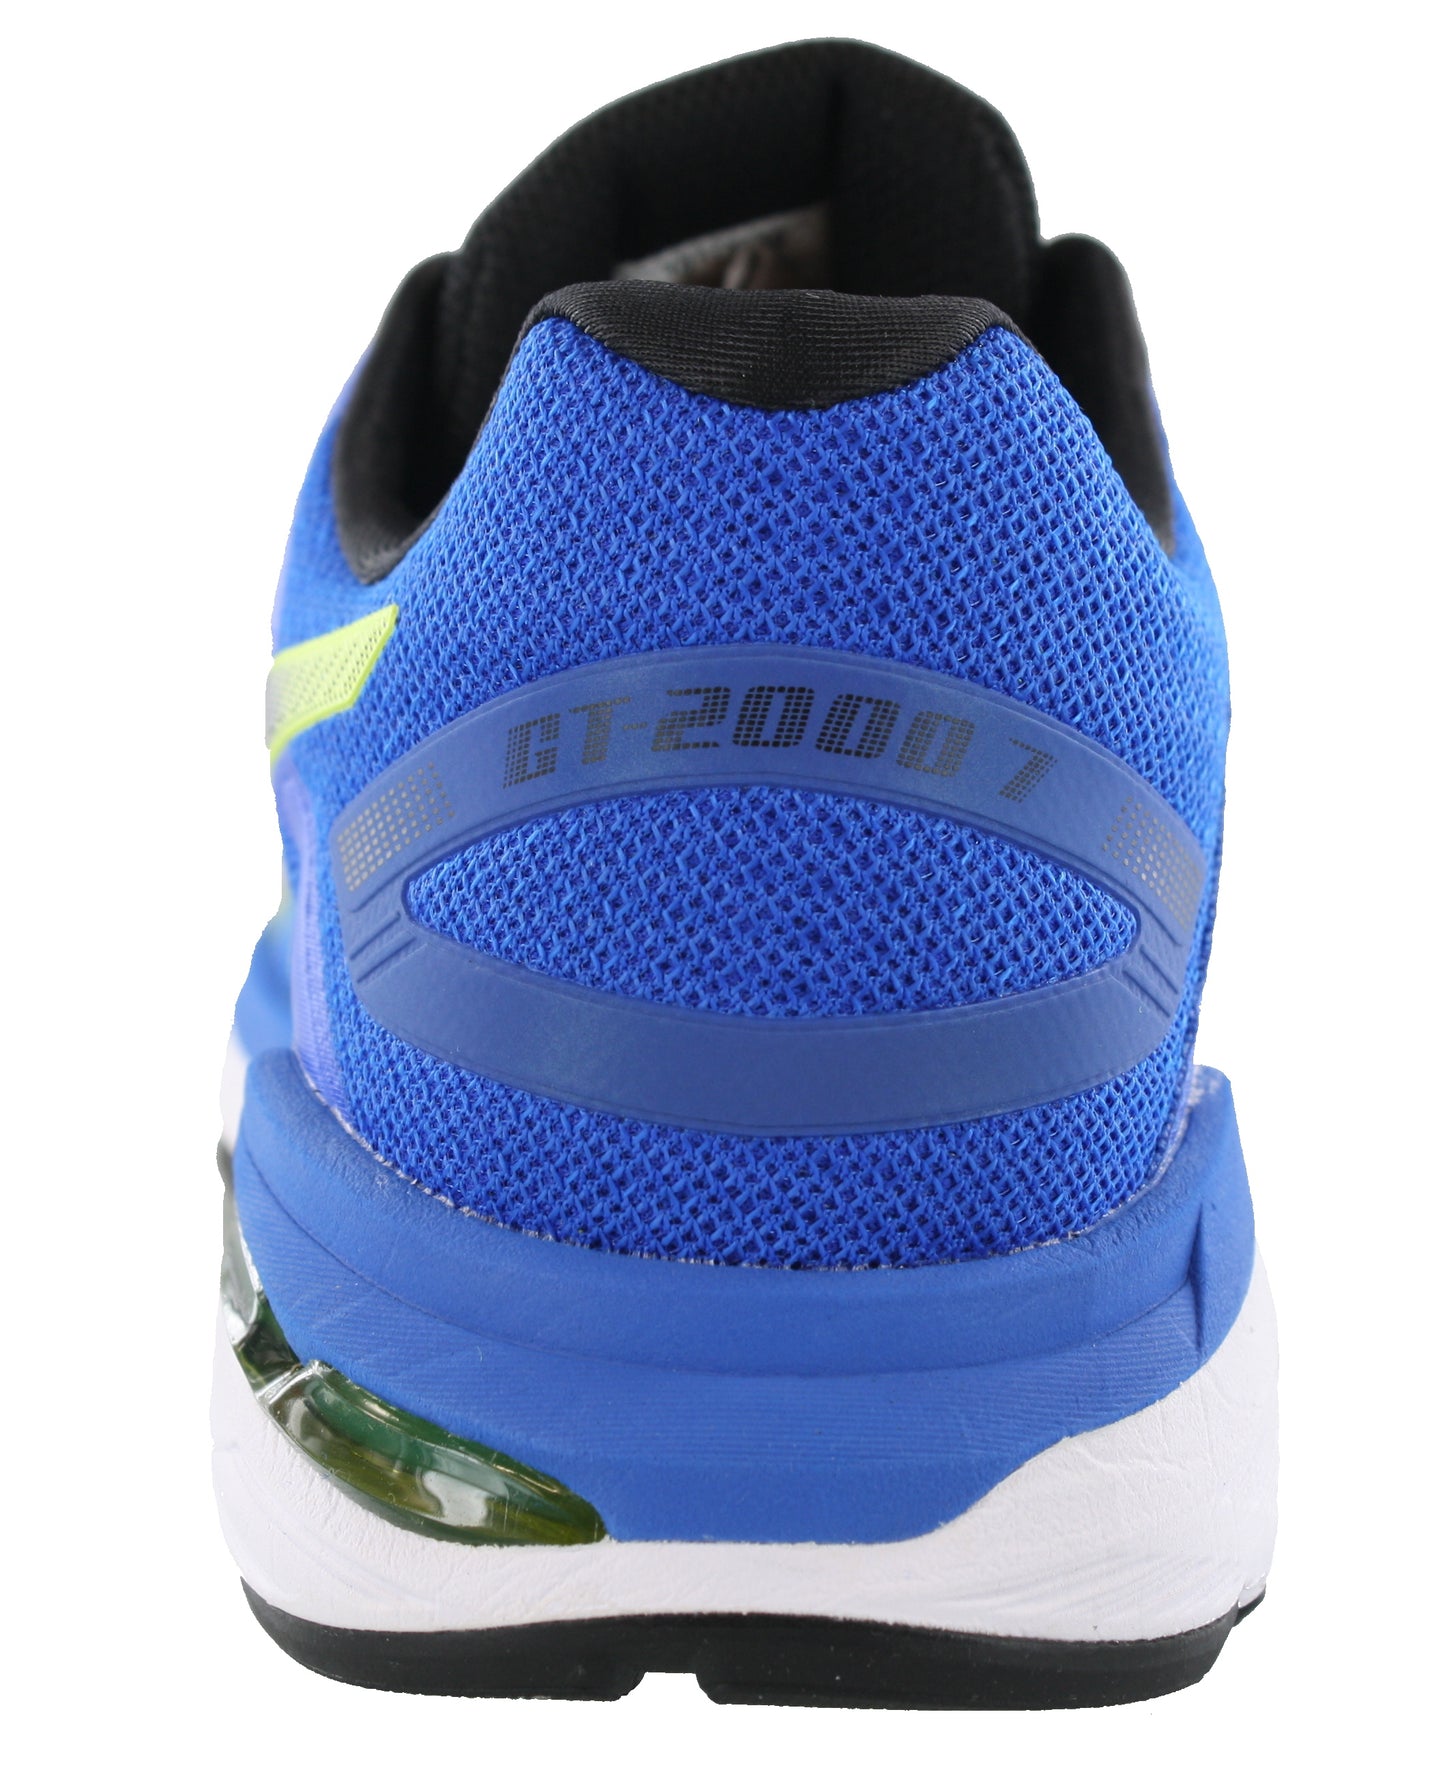 
                  
                    Back of Illusion Blue with Black and Yellow accents ASICS Men Walking Trail Cushioned Running Shoes GT 2000 7
                  
                